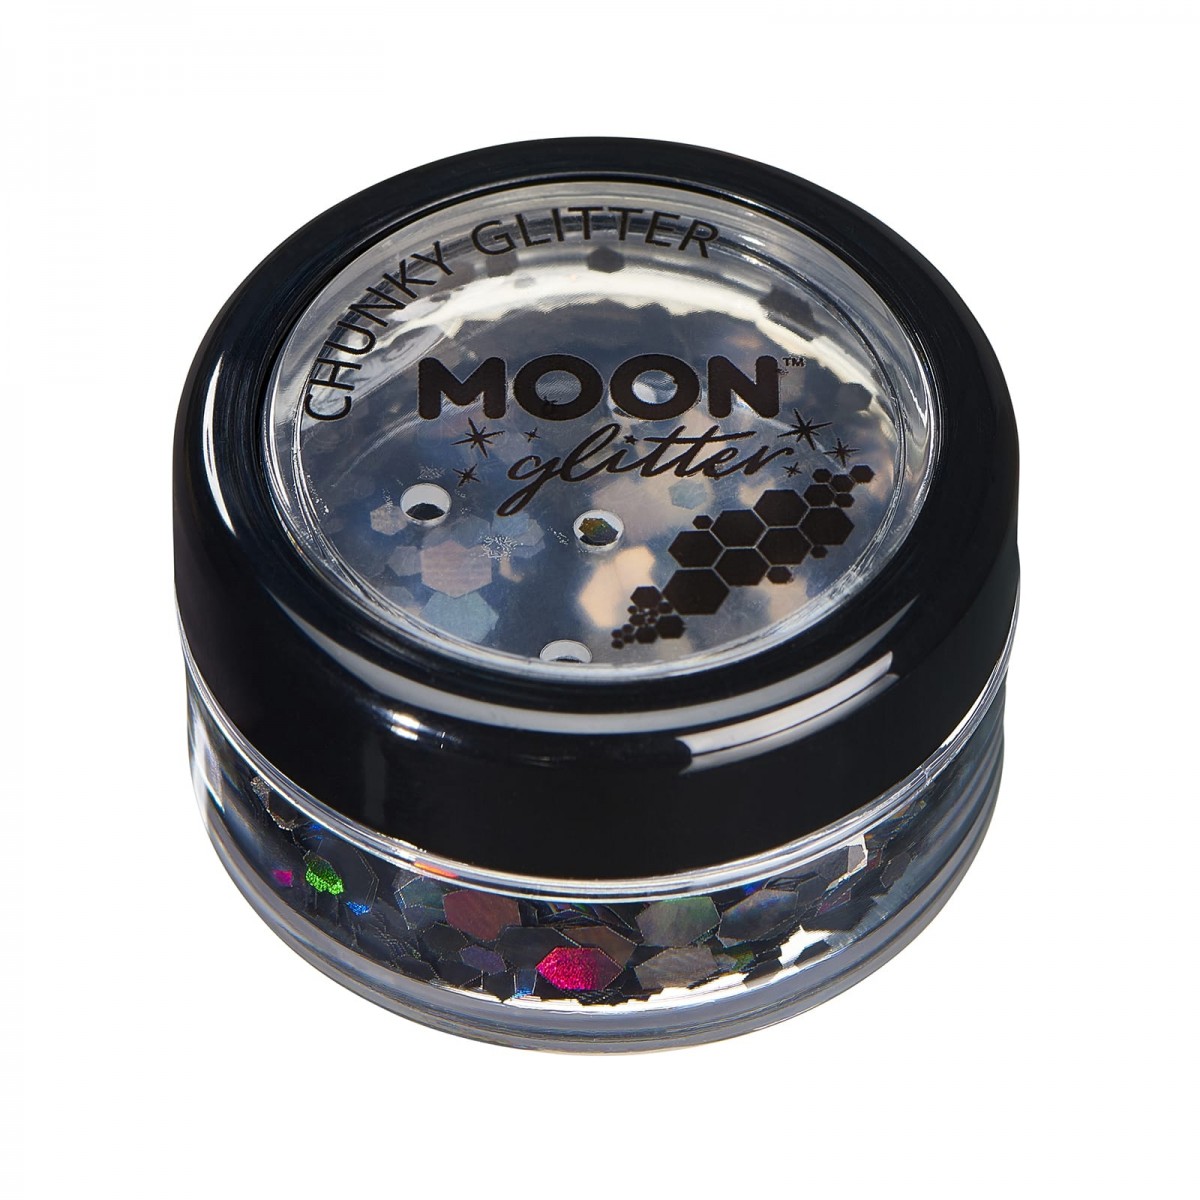 MOON CREATIONS G4 HOLOGRAPHIC CHUNKY GLITTER BLACK 3g